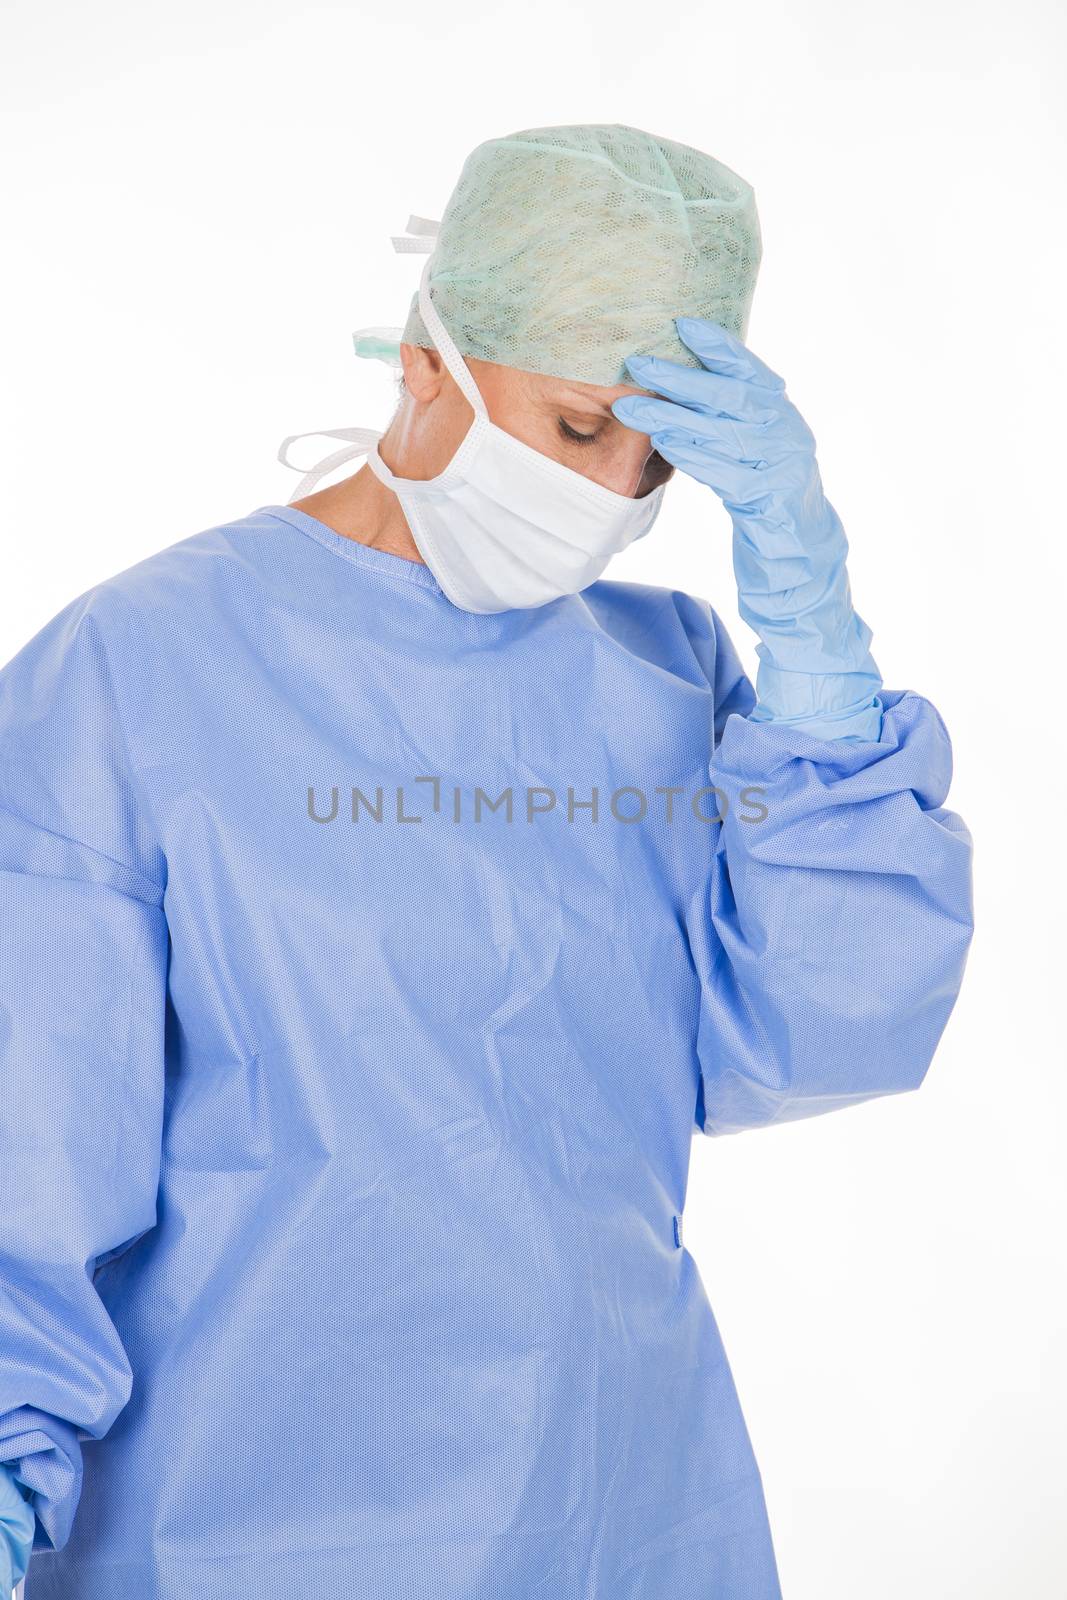 tired woman surgeon after a operation by Flareimage